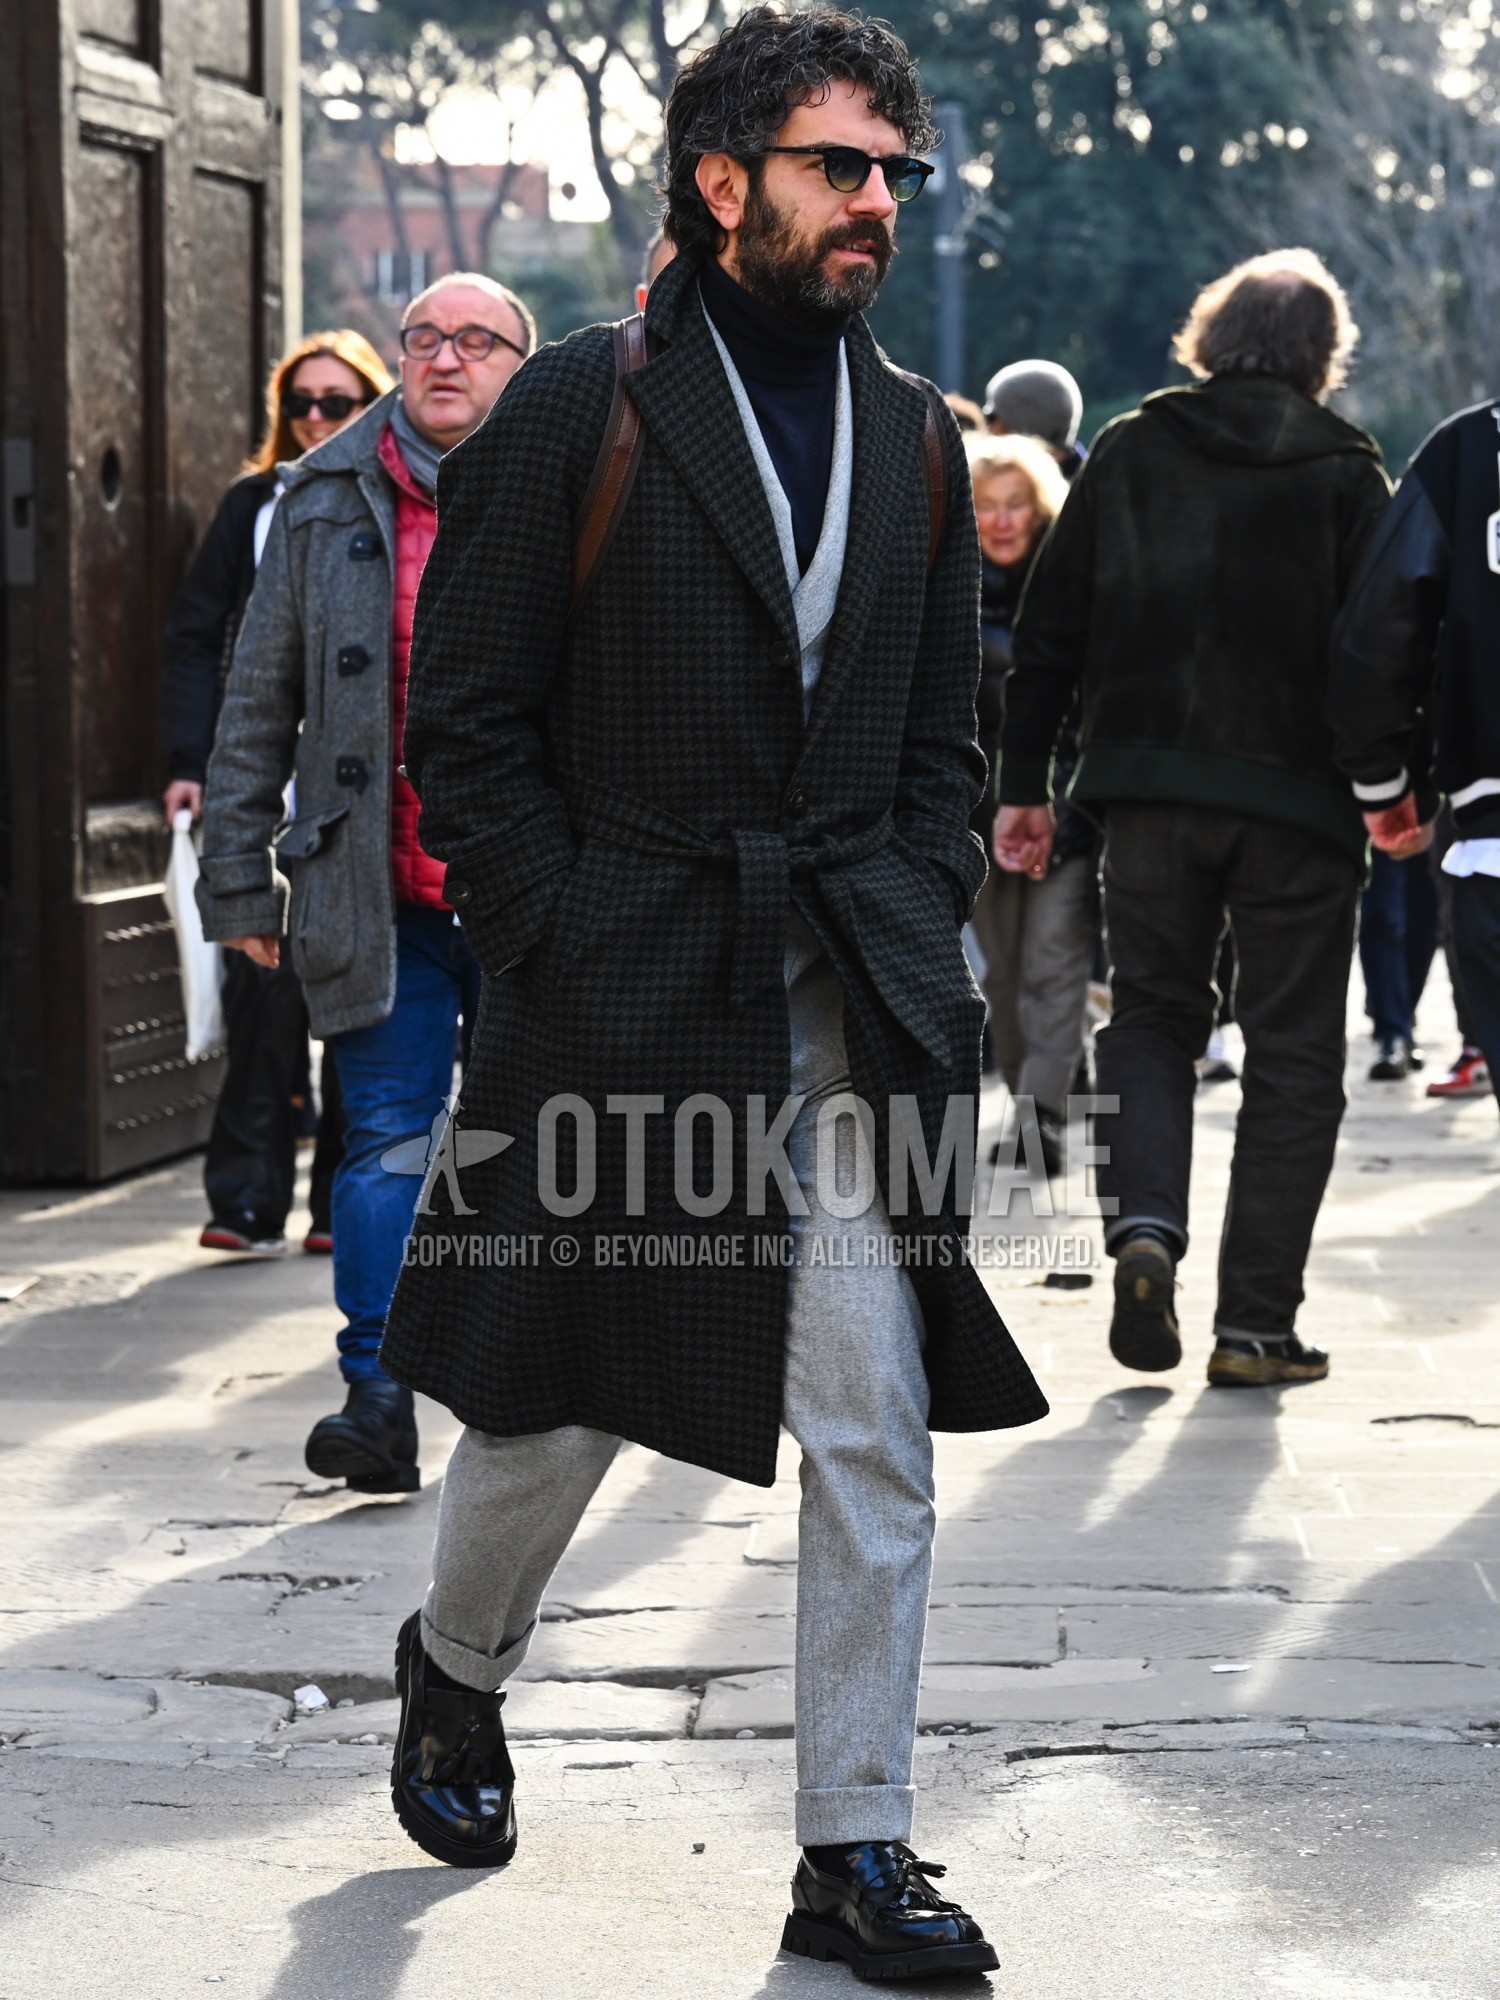 Men's autumn winter outfit with black plain sunglasses, dark gray check belted coat, navy plain turtleneck knit, gray plain tailored jacket, gray plain slacks, black plain socks, black tassel loafers leather shoes, brown plain backpack.